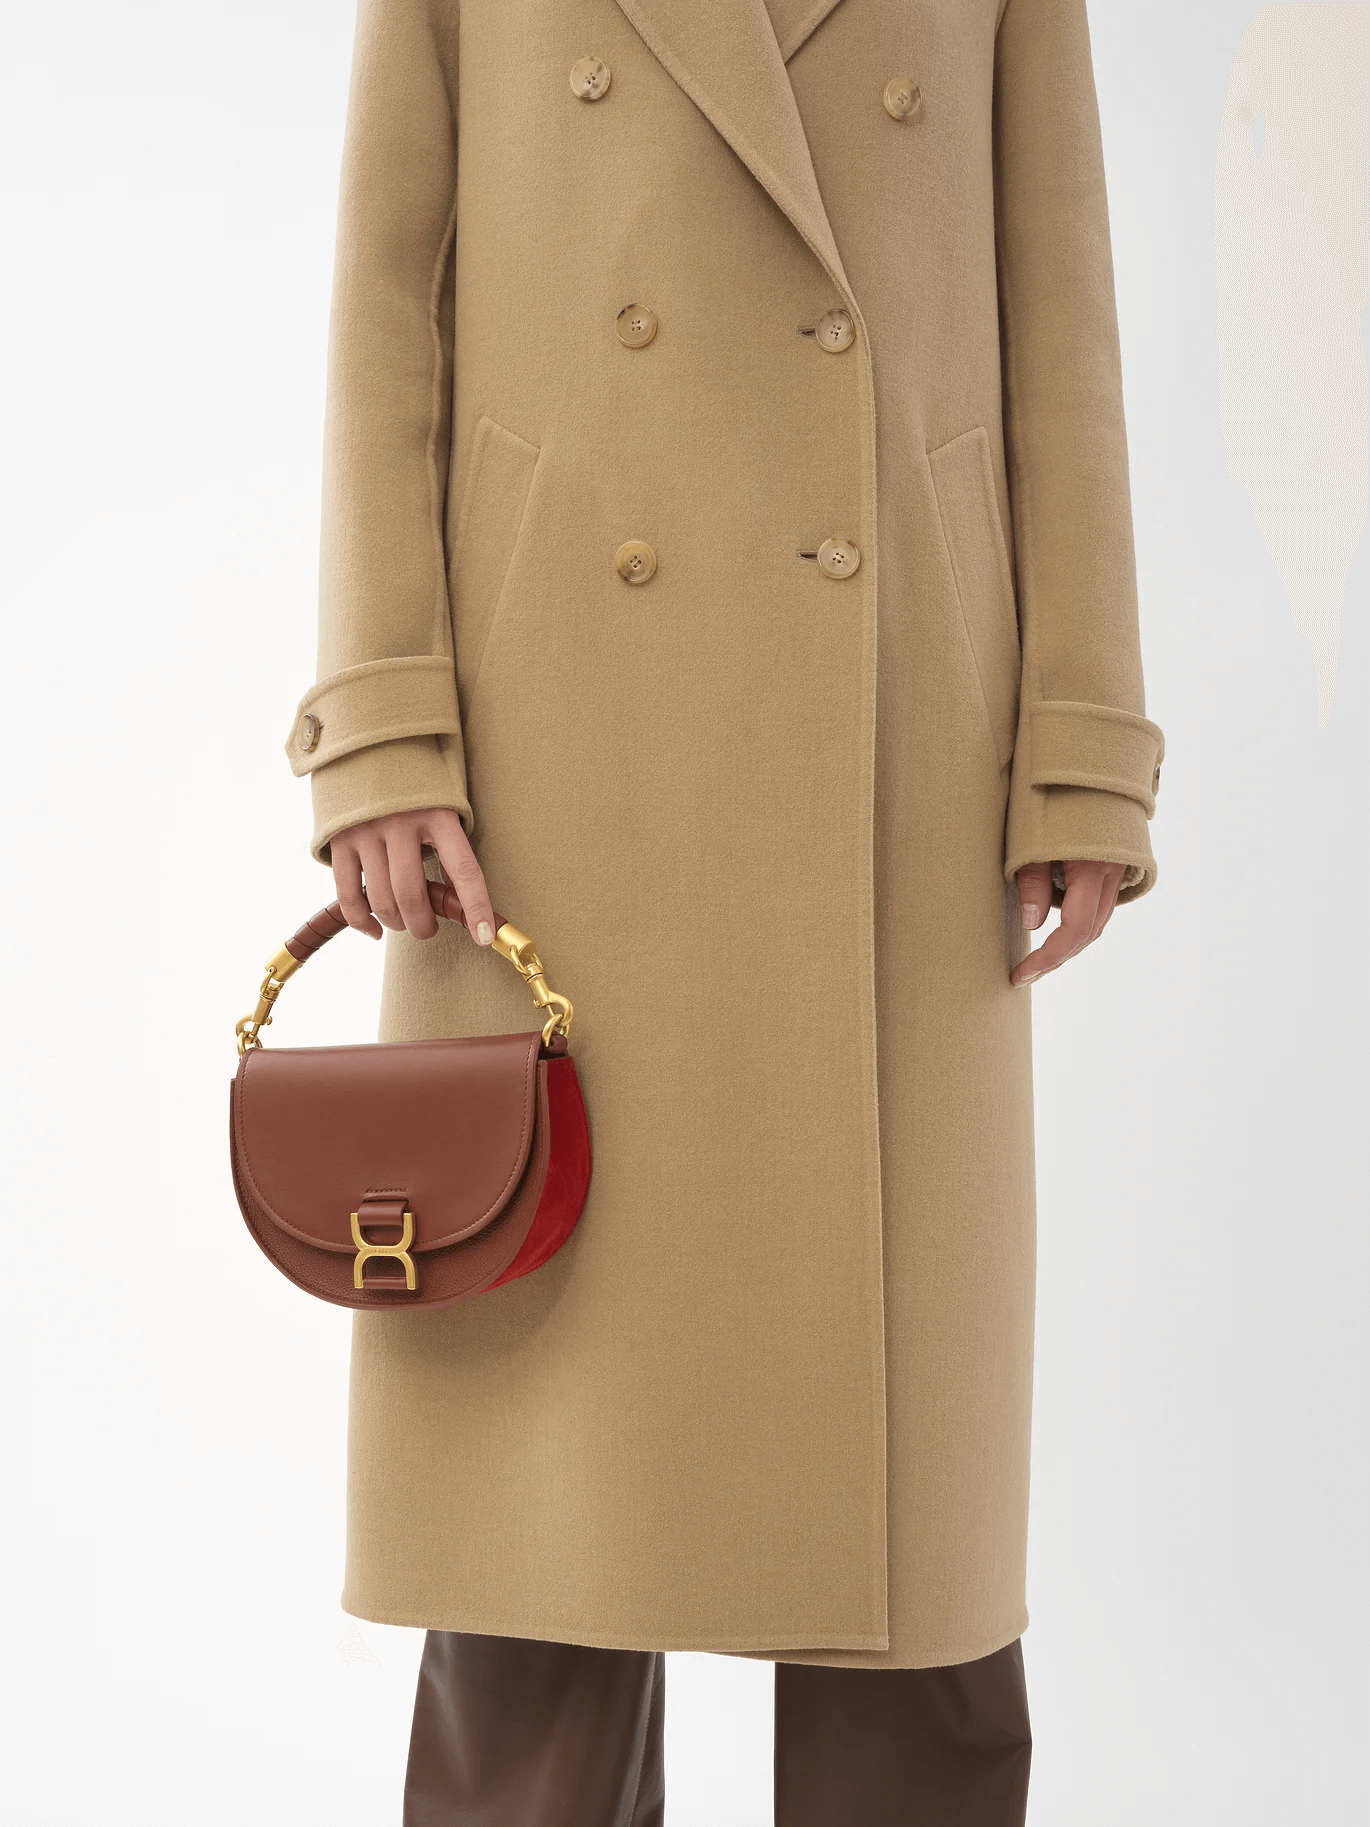 Chloé Marcie Chain Flap Bag in Sepia Brown available at The New Trend.